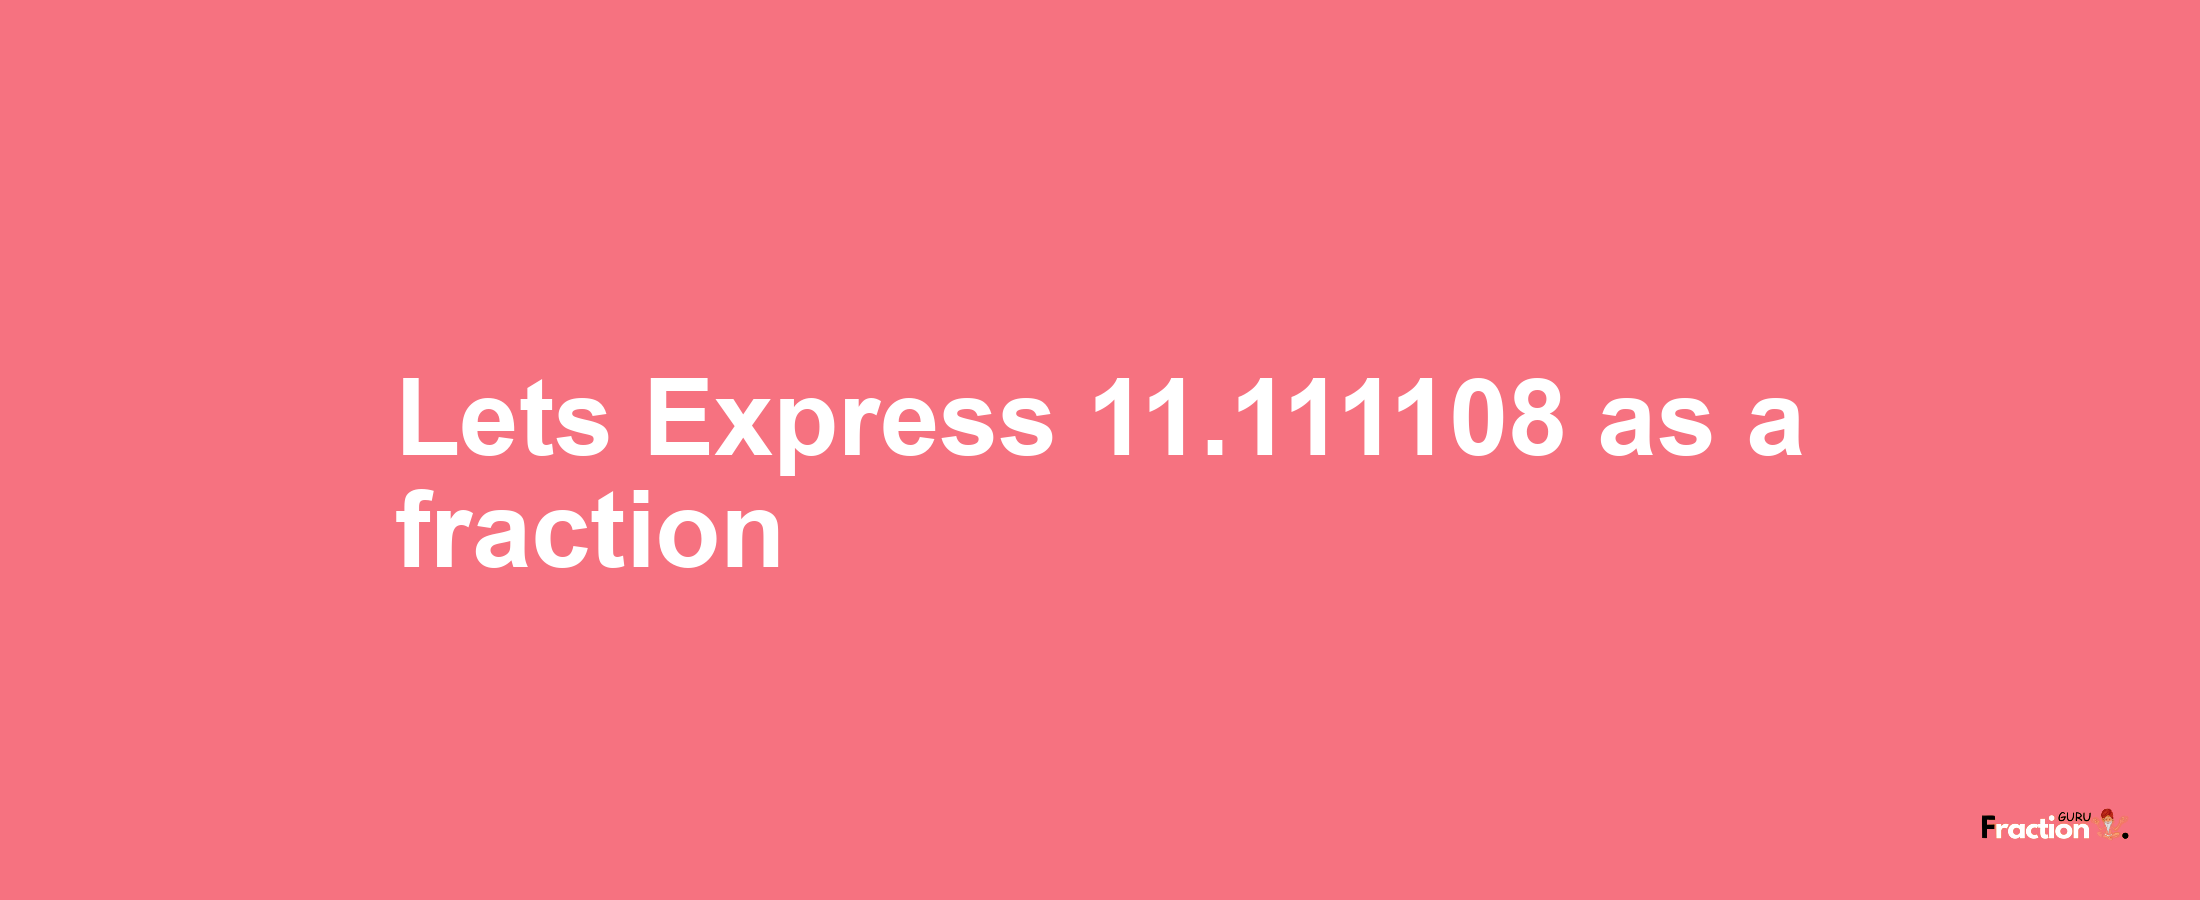 Lets Express 11.111108 as afraction